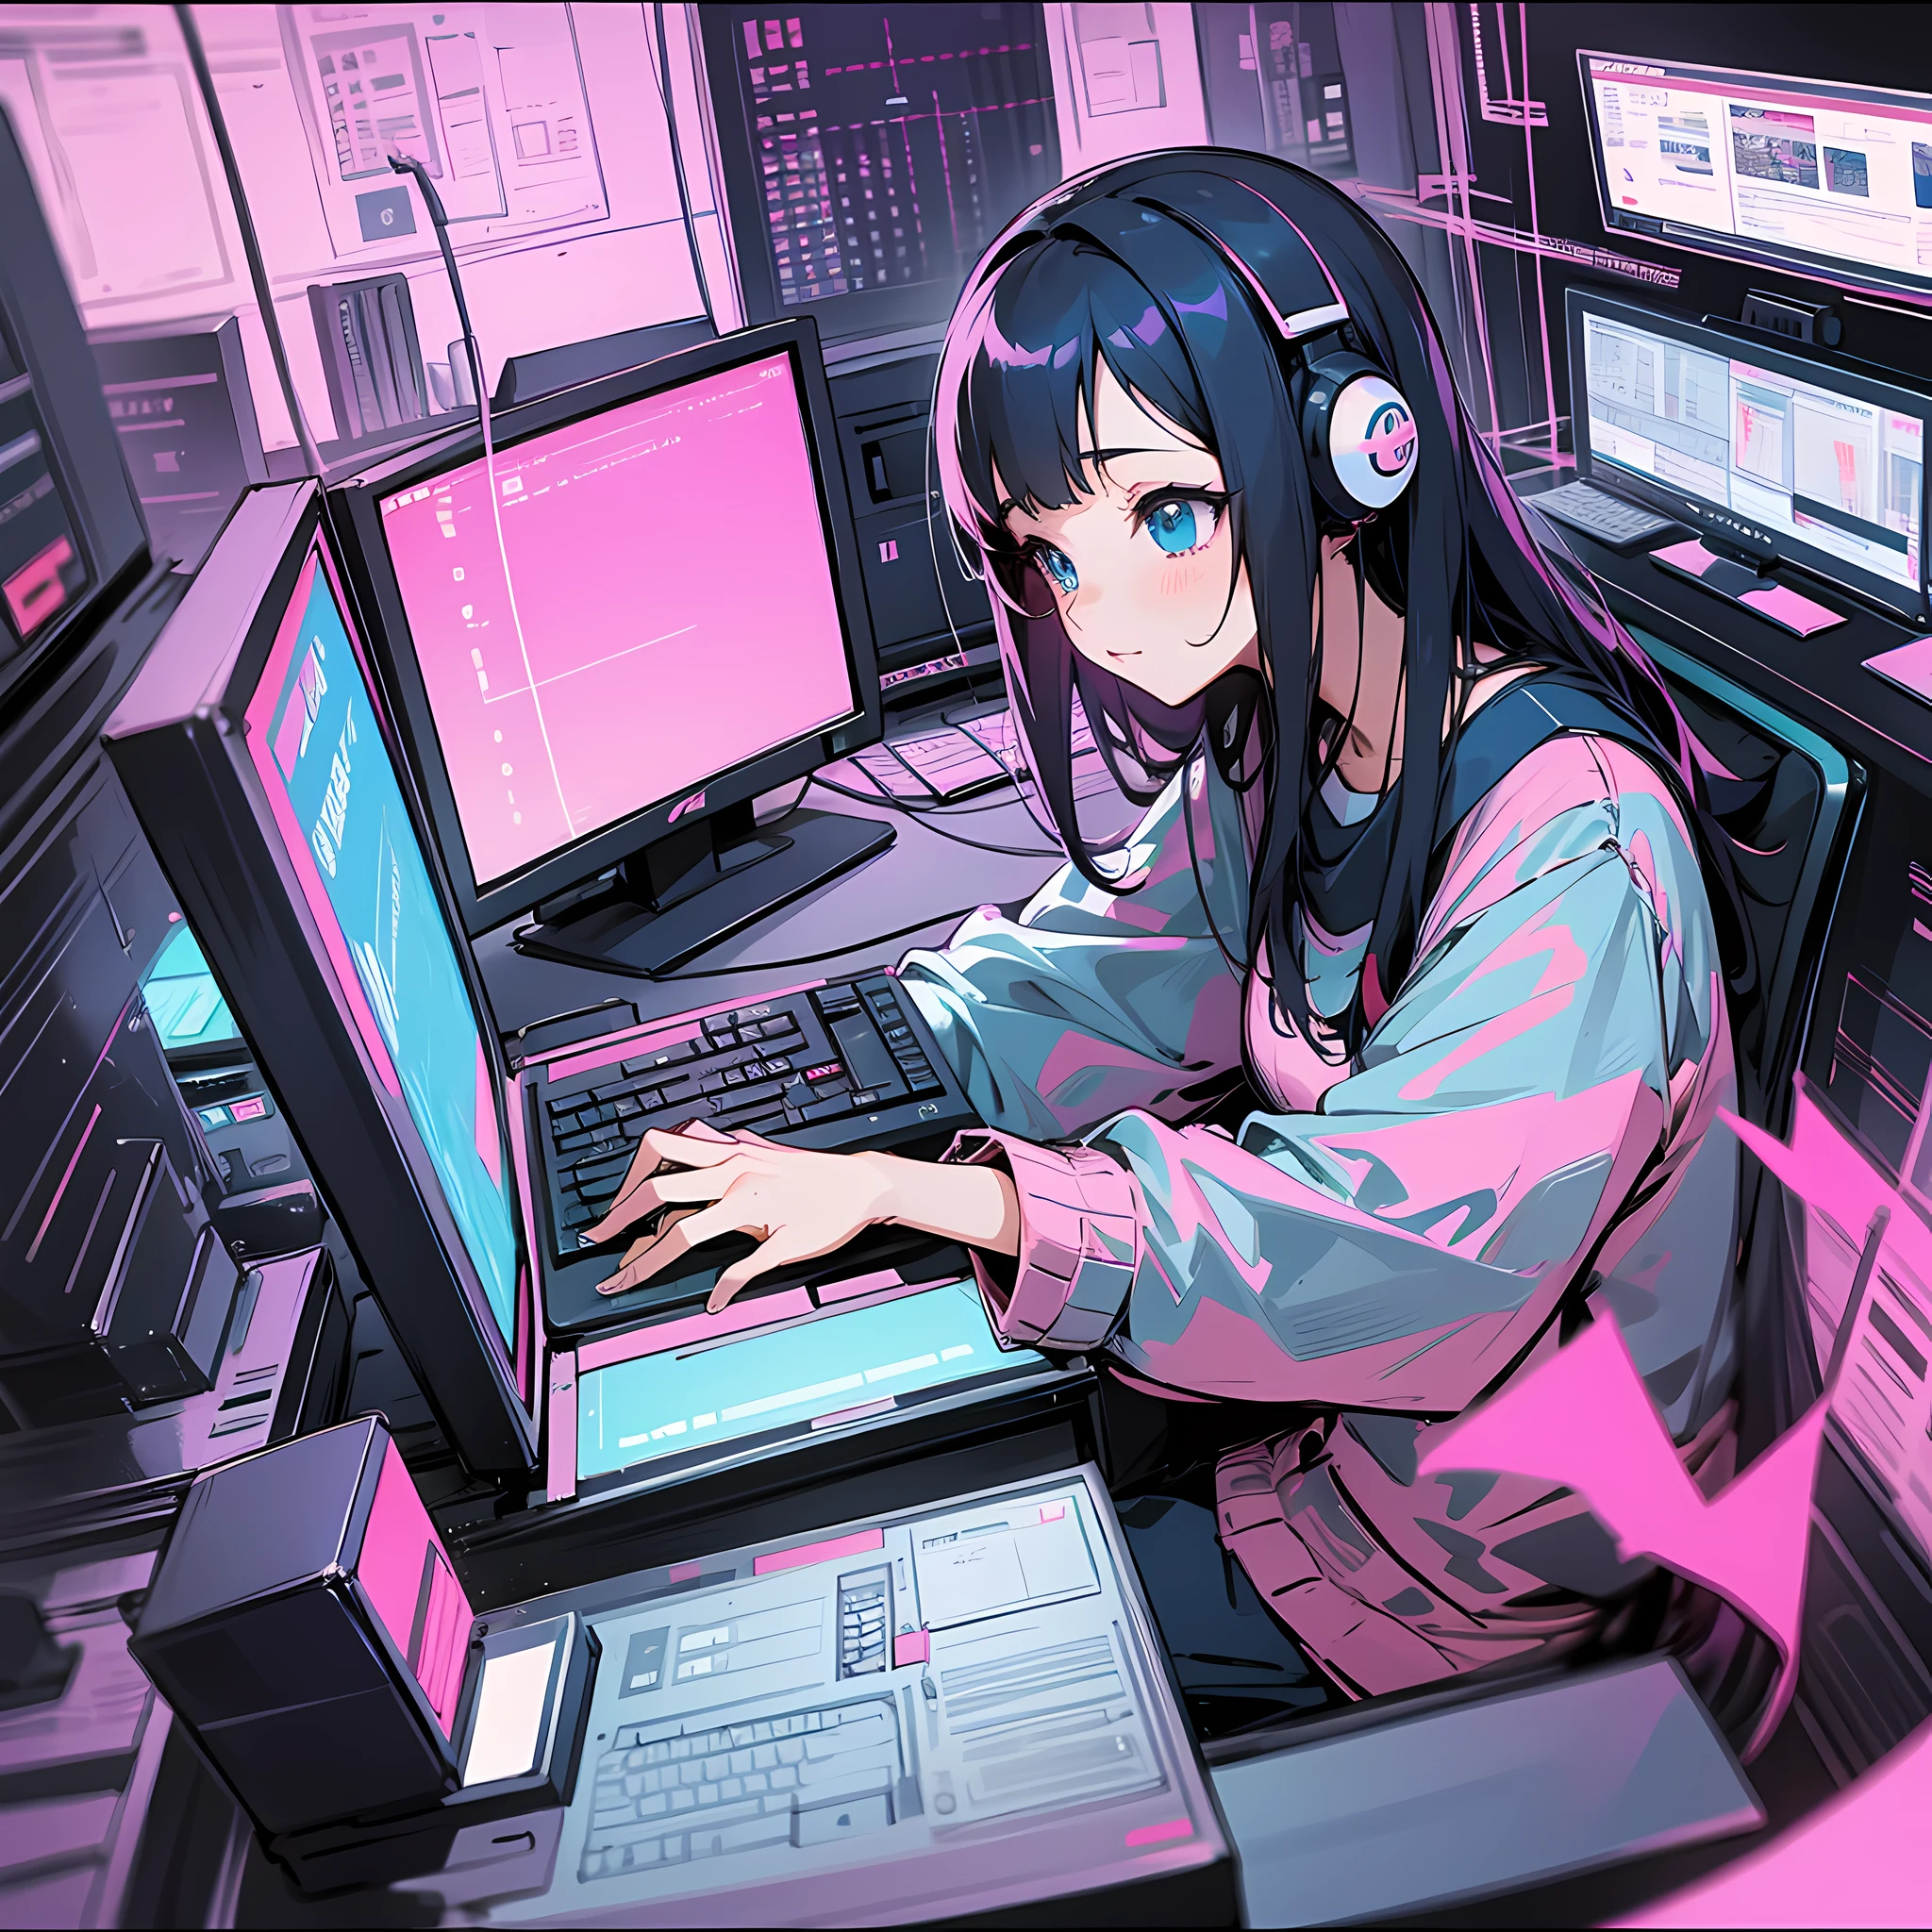 Cute anime girl with strawberry blonde hair programming on a computer, anime”  : r/dalle2